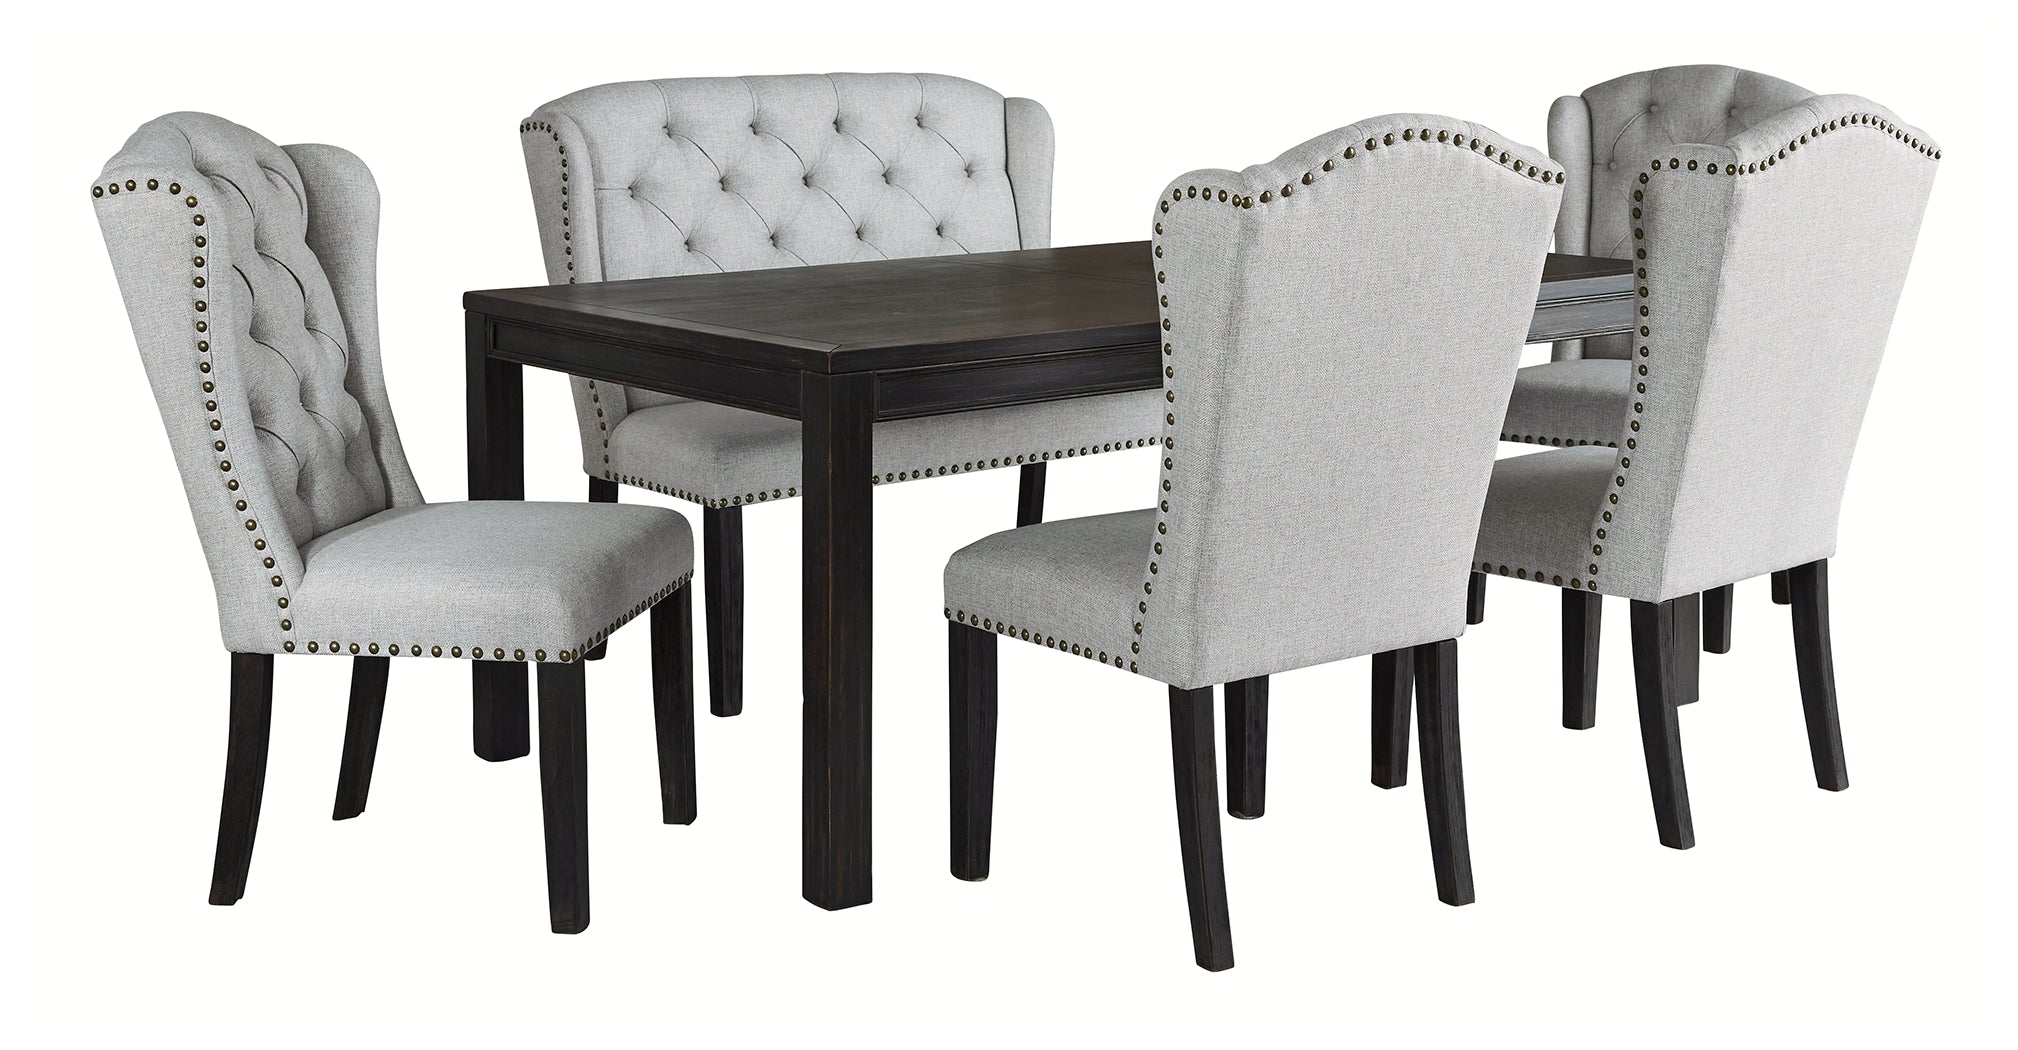 Jeanette Ashley 6-Piece Dining Room Set